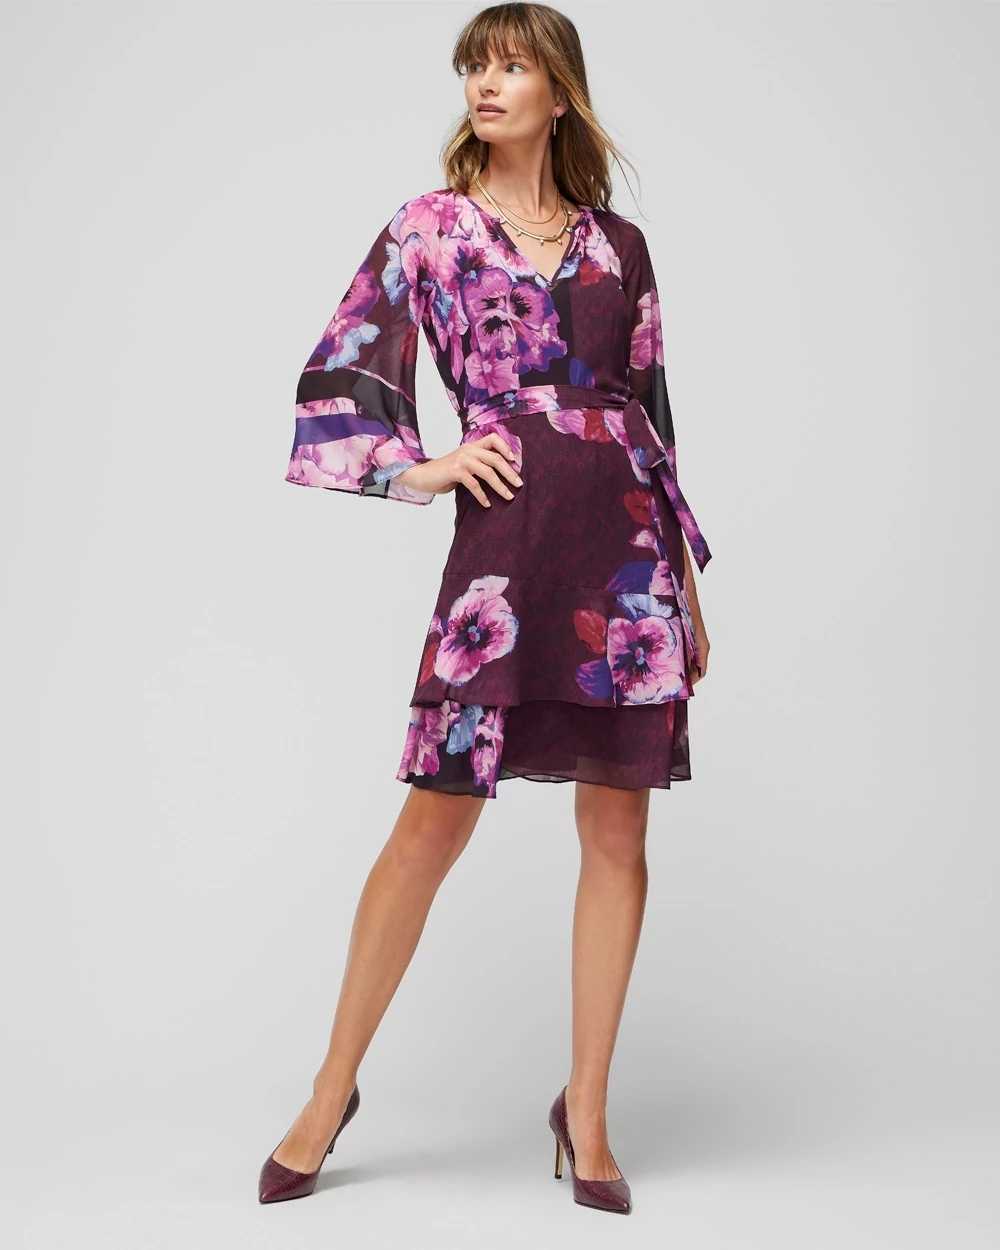 3/4 Sleeve Ruffle Blouson Dress click to view larger image.